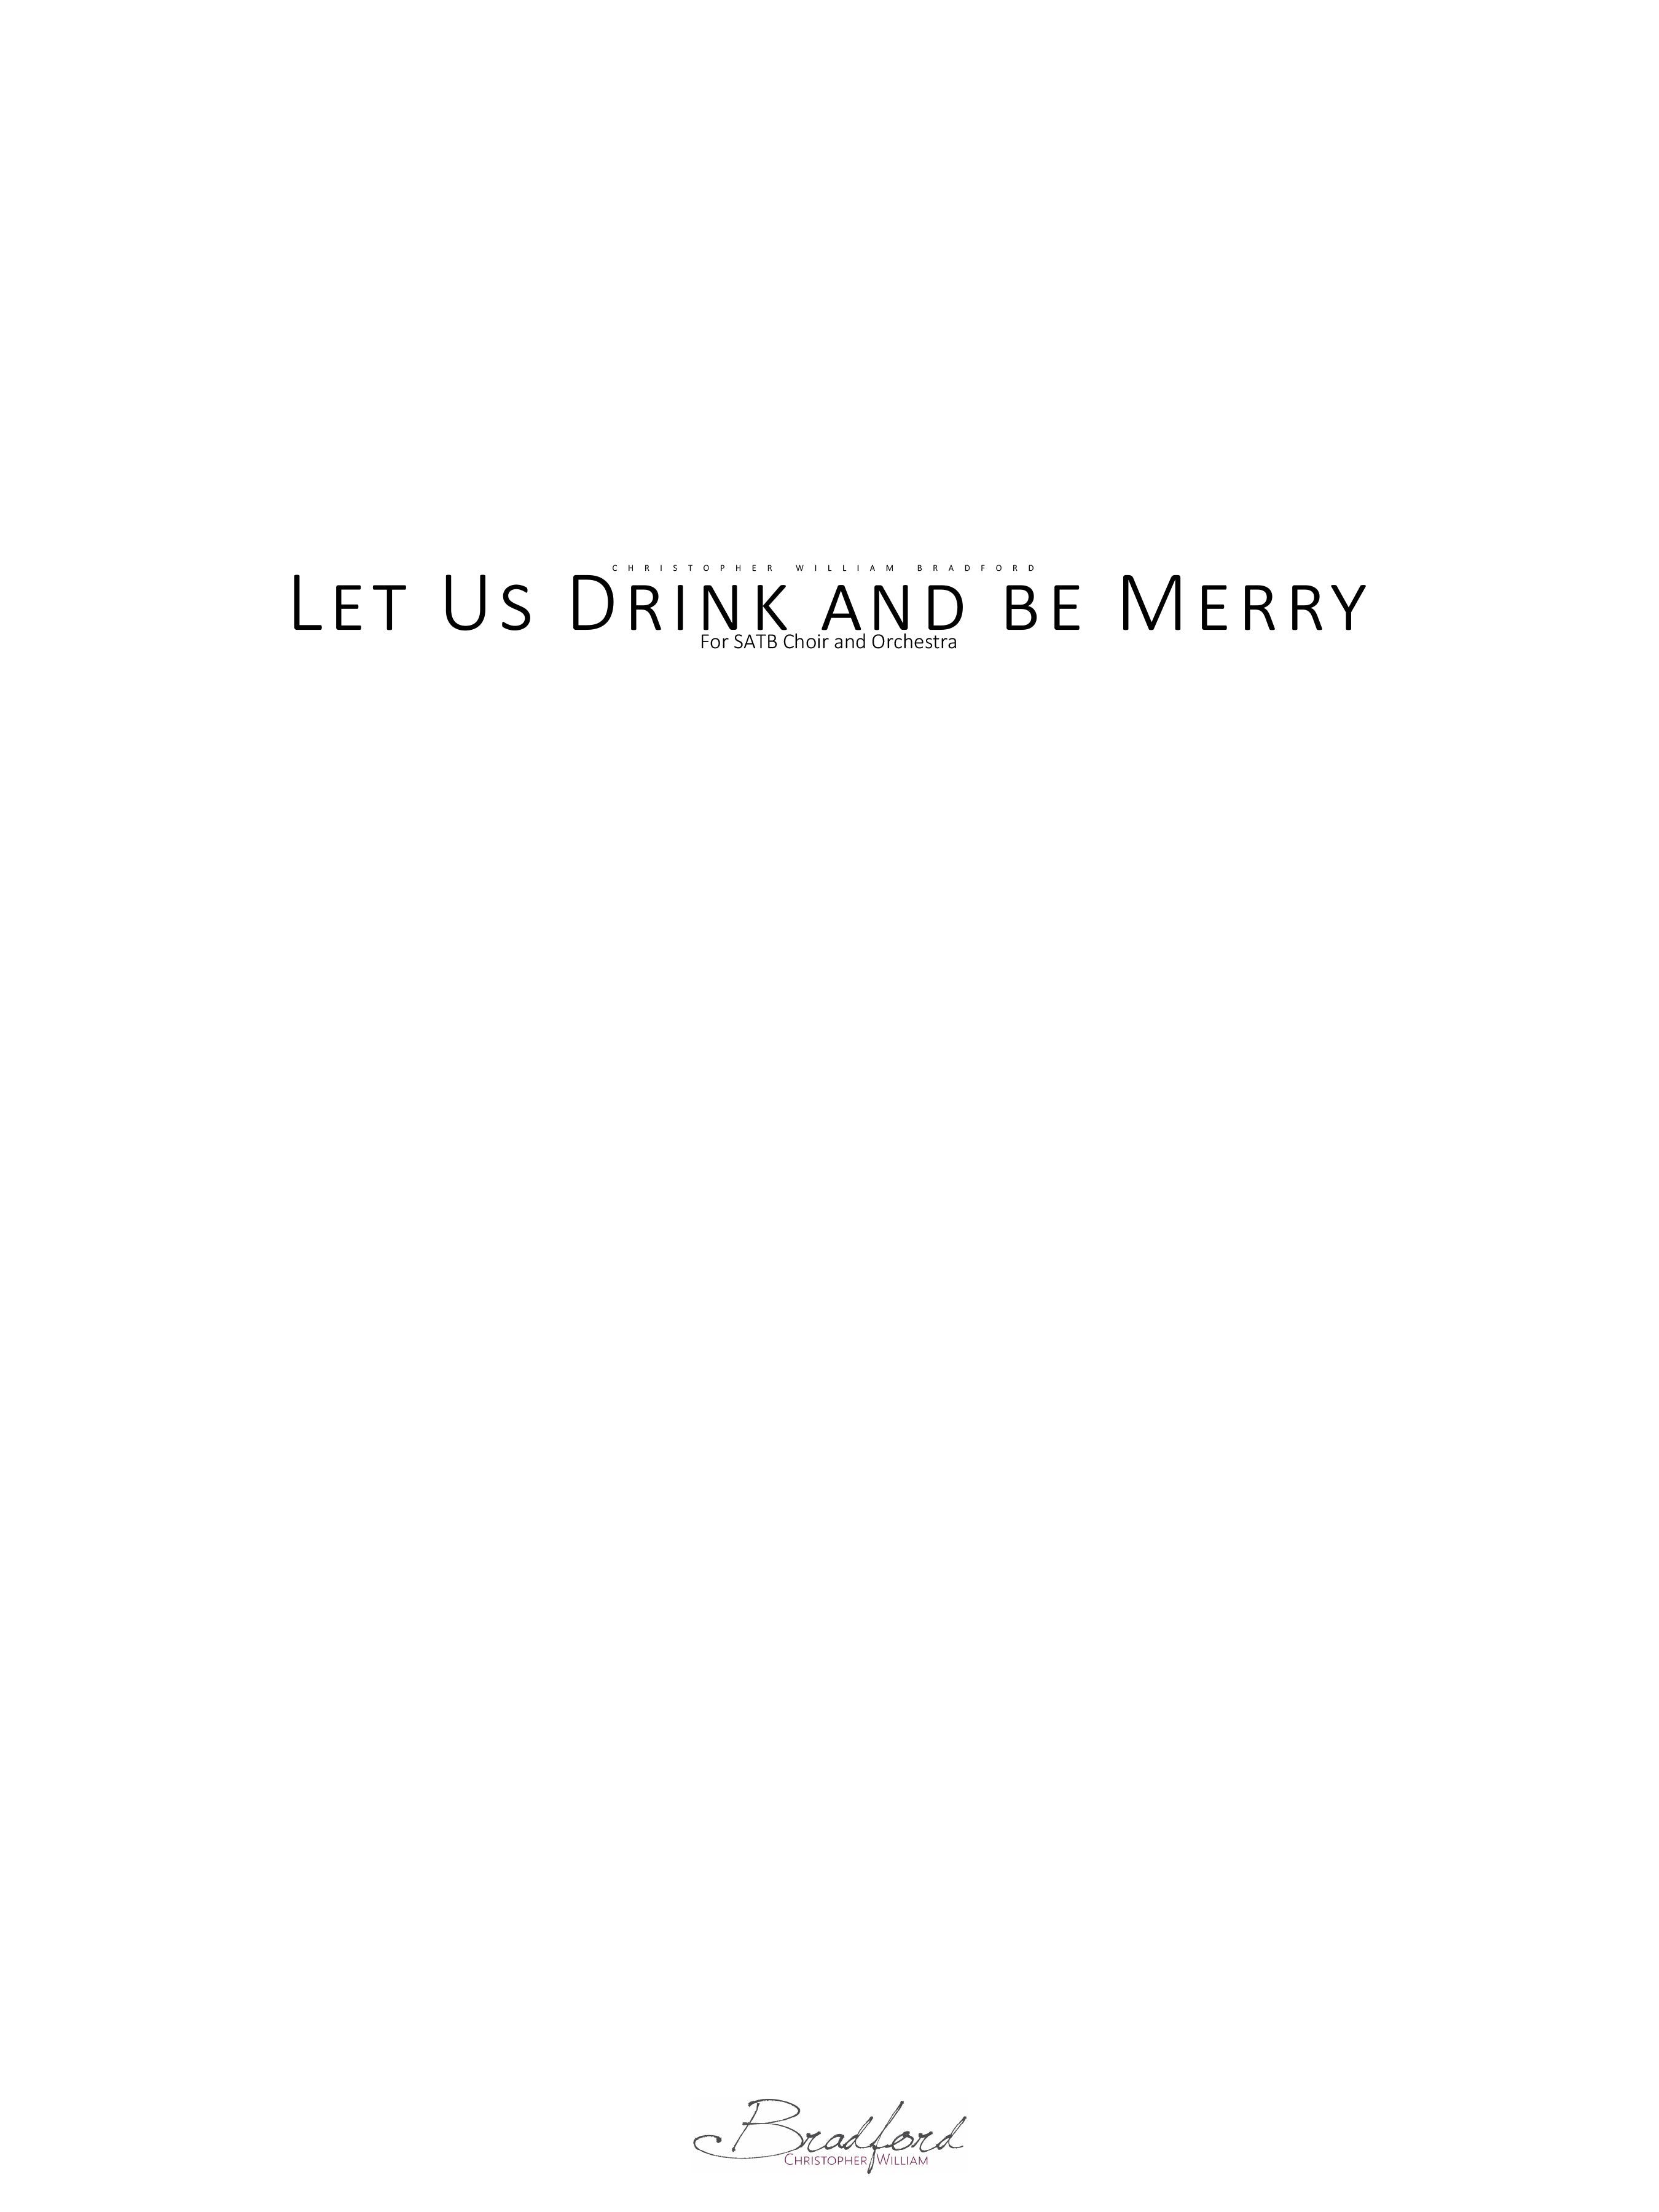 Let Us Drink and be Merry